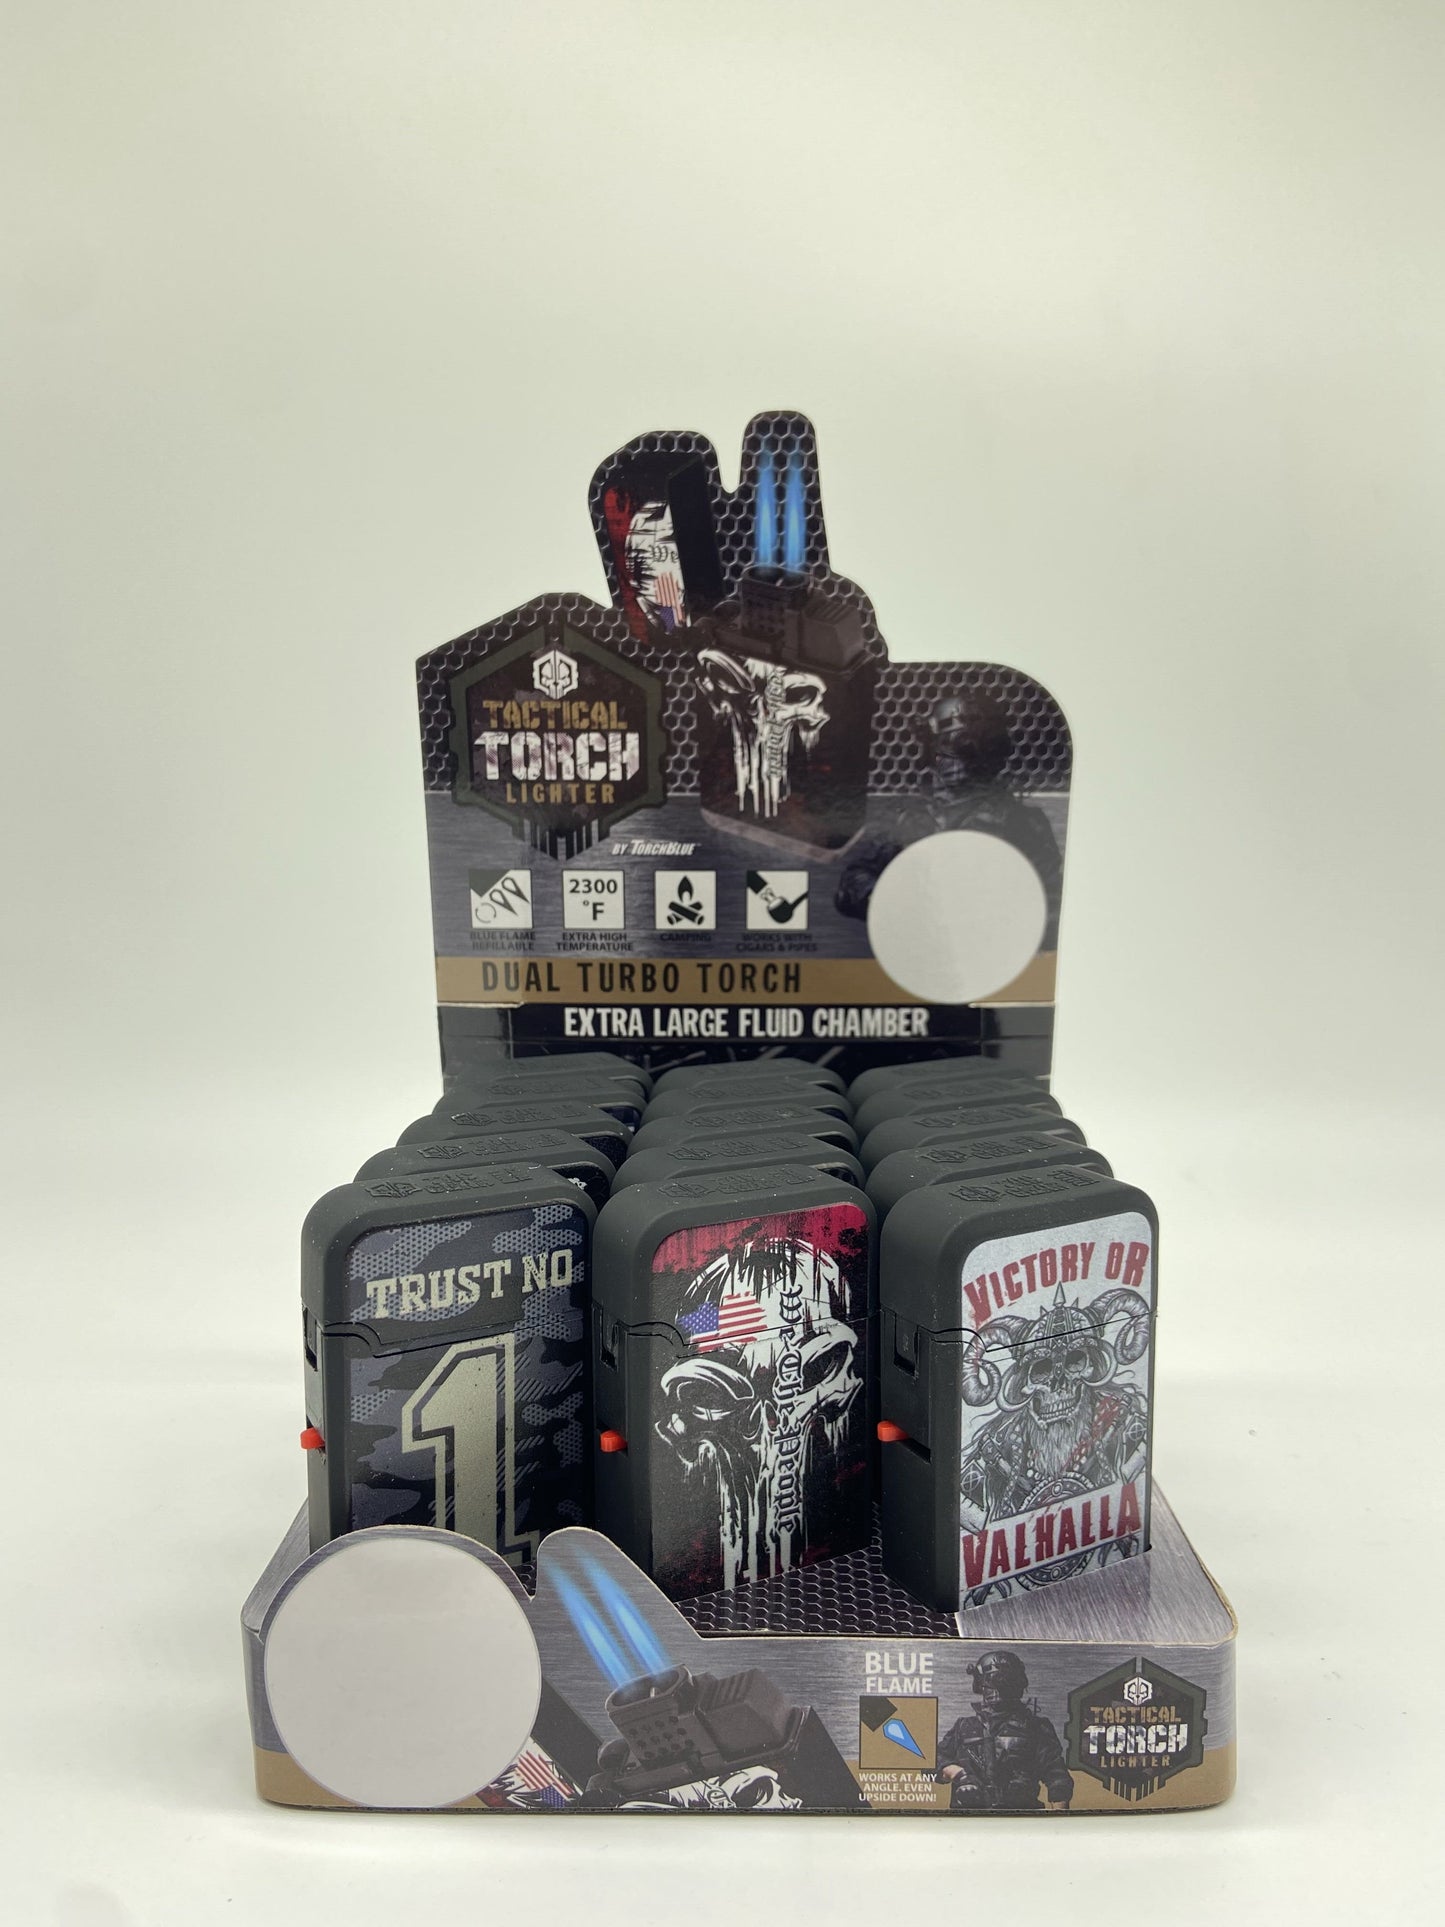 ITEM NUMBER 023087 TACGEAR TORCH LIGHTER 15 PIECES PER DISPLAY